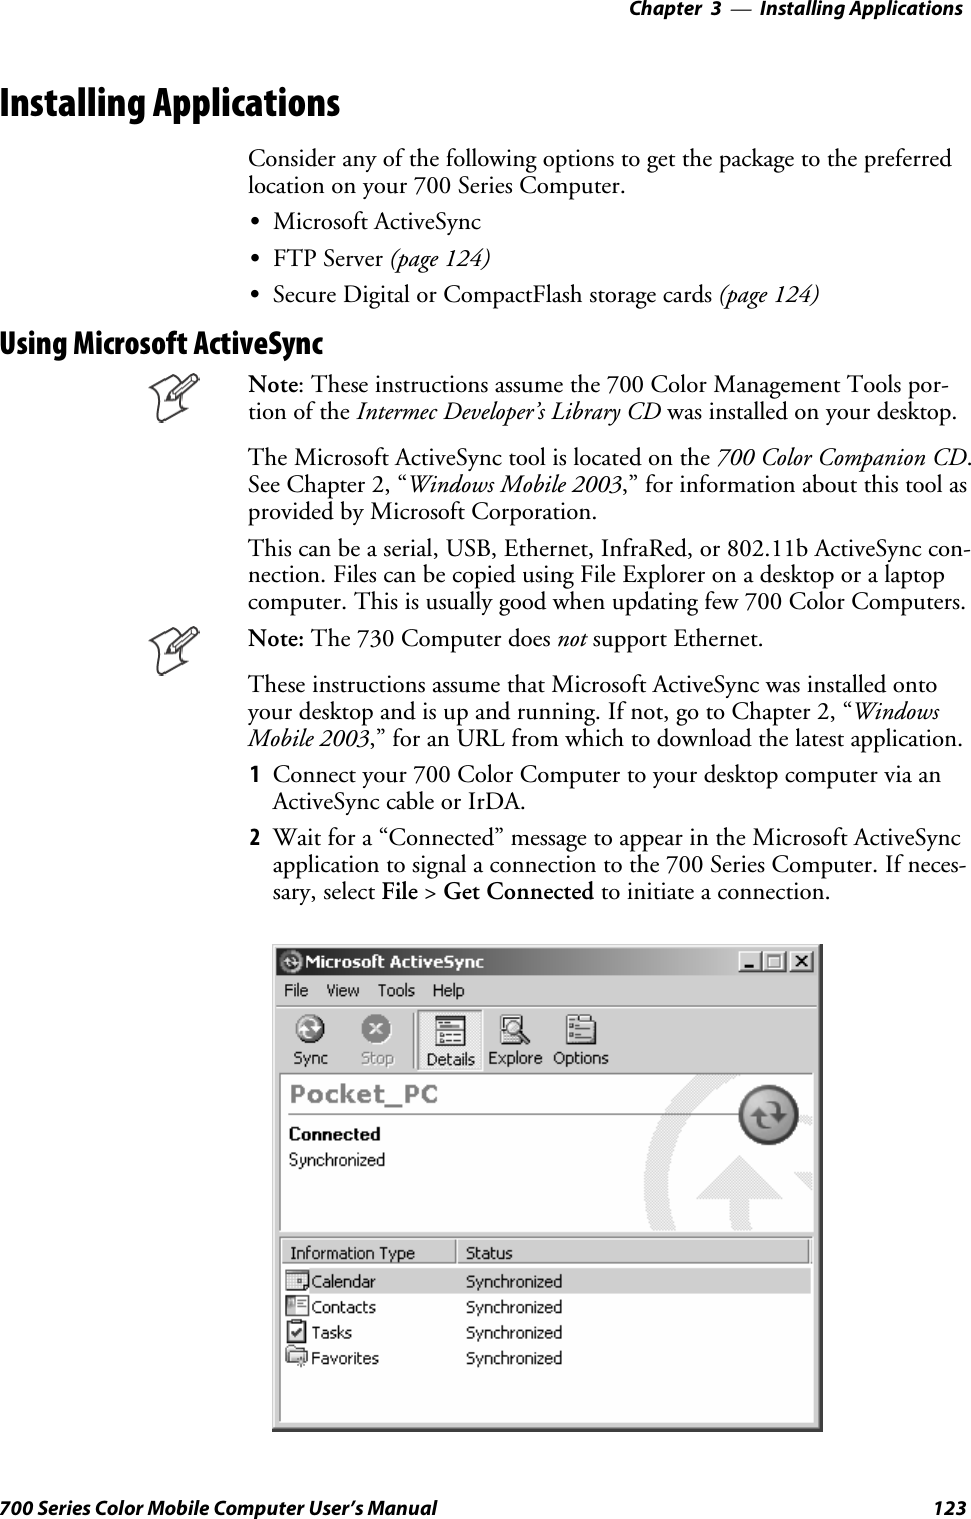 Installing Applications—Chapter 3123700 Series Color Mobile Computer User’s ManualInstalling ApplicationsConsider any of the following options to get the package to the preferredlocation on your 700 Series Computer.SMicrosoft ActiveSyncSFTP Server (page 124)SSecure Digital or CompactFlash storage cards (page 124)Using Microsoft ActiveSyncNote: These instructions assume the 700 Color Management Tools por-tion of the Intermec Developer’s Library CD was installed on your desktop.The Microsoft ActiveSync tool is located on the 700 Color Companion CD.See Chapter 2, “Windows Mobile 2003,” for information about this tool asprovided by Microsoft Corporation.This can be a serial, USB, Ethernet, InfraRed, or 802.11b ActiveSync con-nection. Files can be copied using File Explorer on a desktop or a laptopcomputer. This is usually good when updating few 700 Color Computers.Note: The 730 Computer does not support Ethernet.These instructions assume that Microsoft ActiveSync was installed ontoyour desktop and is up and running. If not, go to Chapter 2, “WindowsMobile 2003,” for an URL from which to download the latest application.1Connectyour700ColorComputertoyourdesktopcomputerviaanActiveSync cable or IrDA.2Wait for a “Connected” message to appear in the Microsoft ActiveSyncapplication to signal a connection to the 700 Series Computer. If neces-sary, select File &gt;Get Connected to initiate a connection.